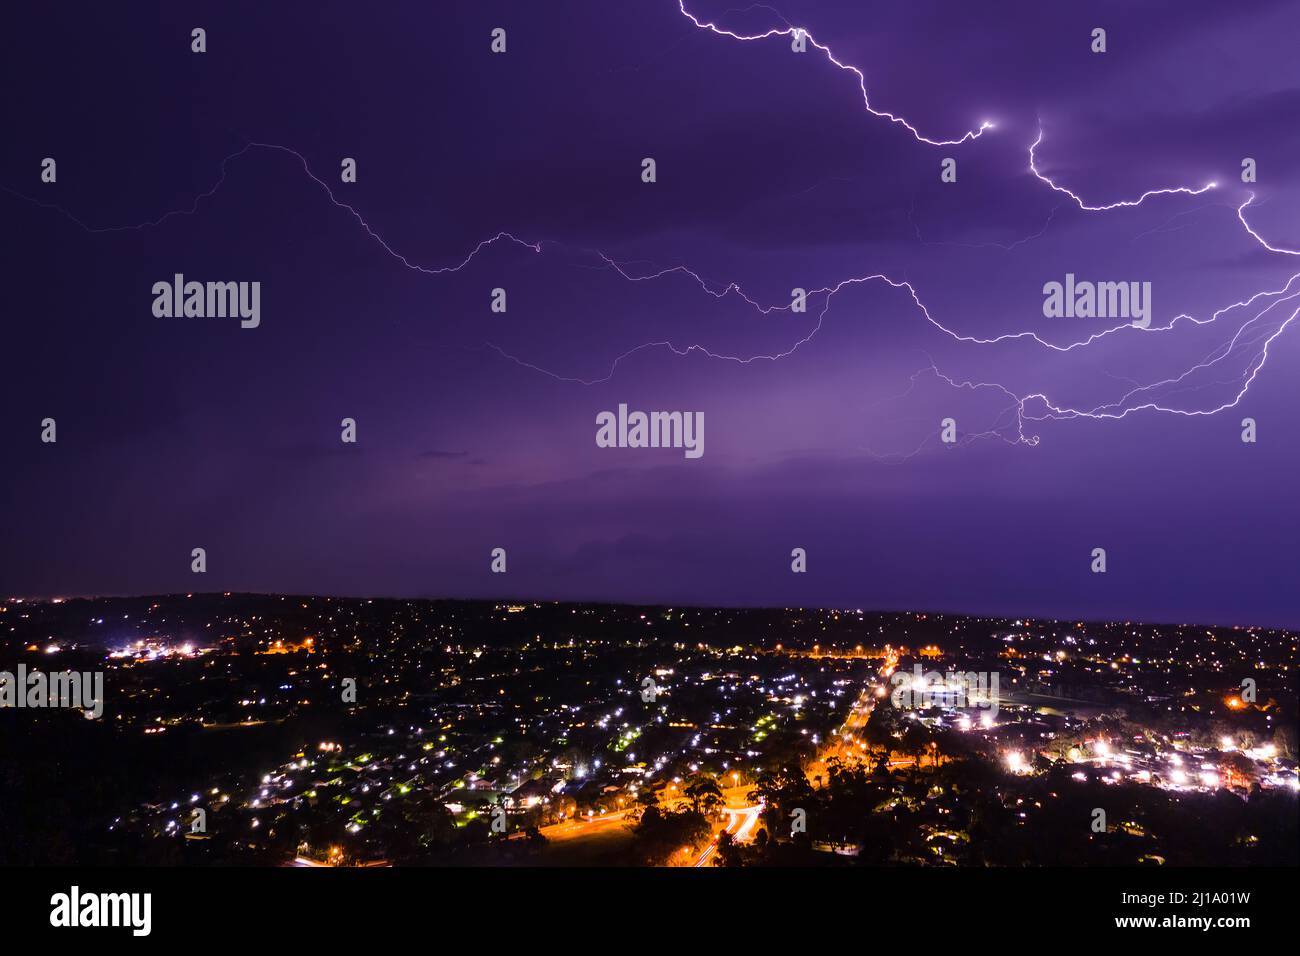 Lightning bolt discharging in the stormy clouds above the street lights aerial nighttime shot Stock Photo